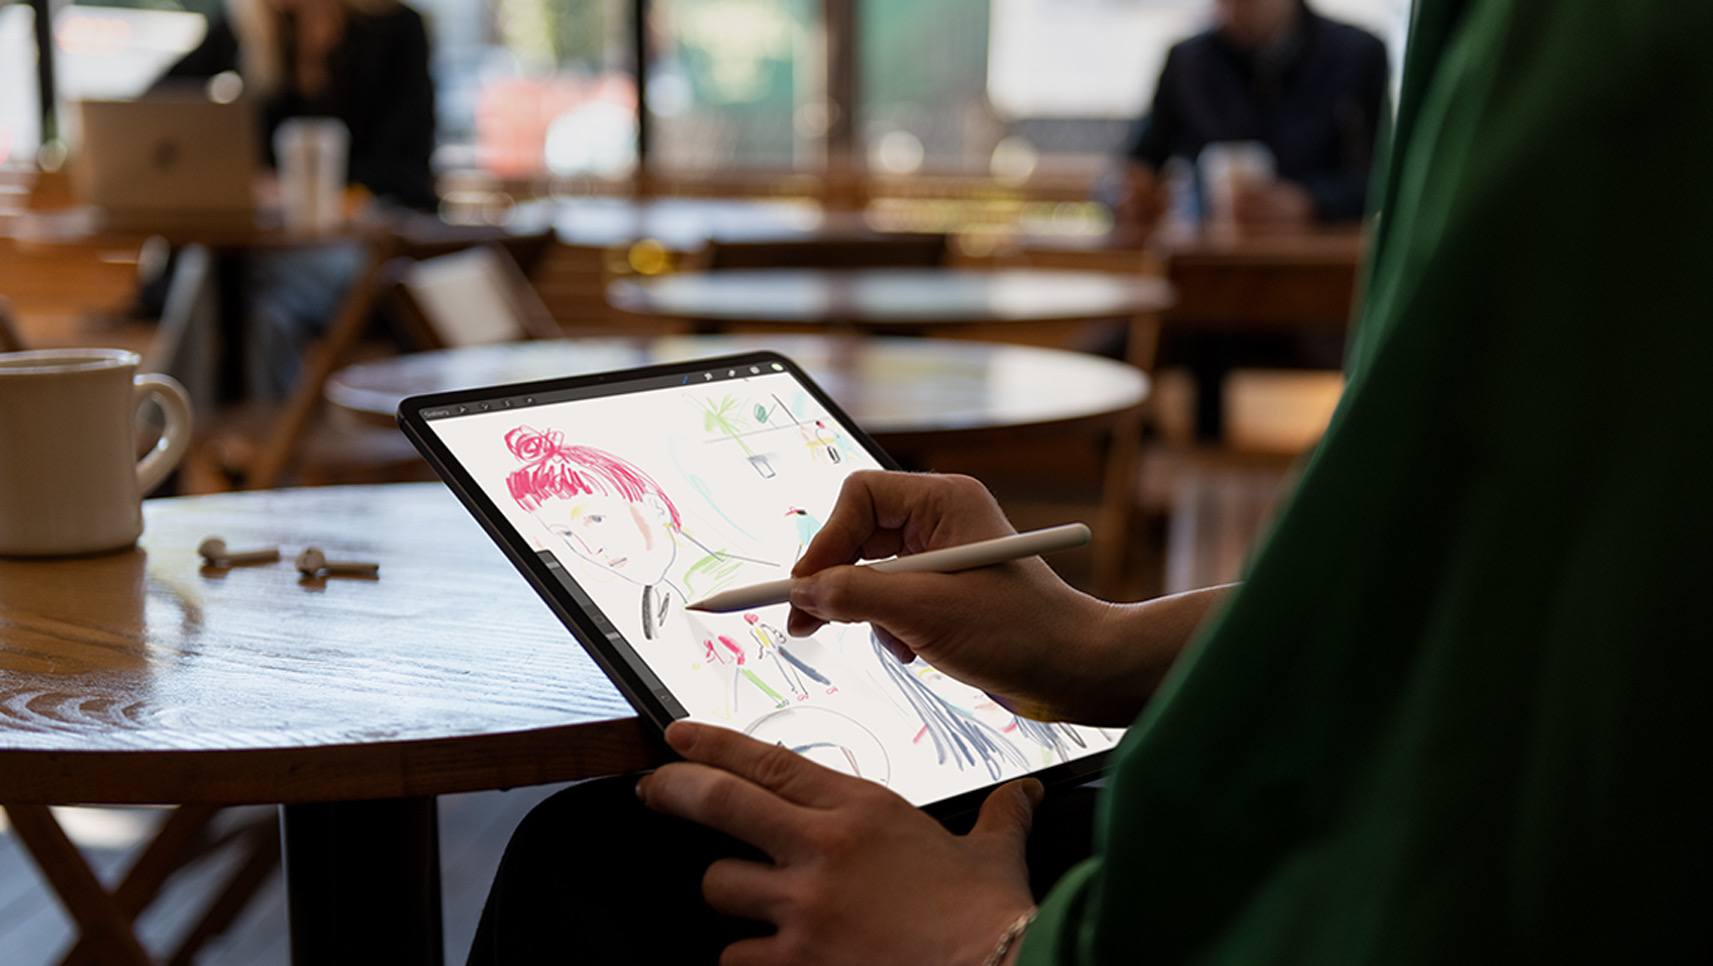 The Apple Pencil is one of several catalysts in the iPad's evolution.